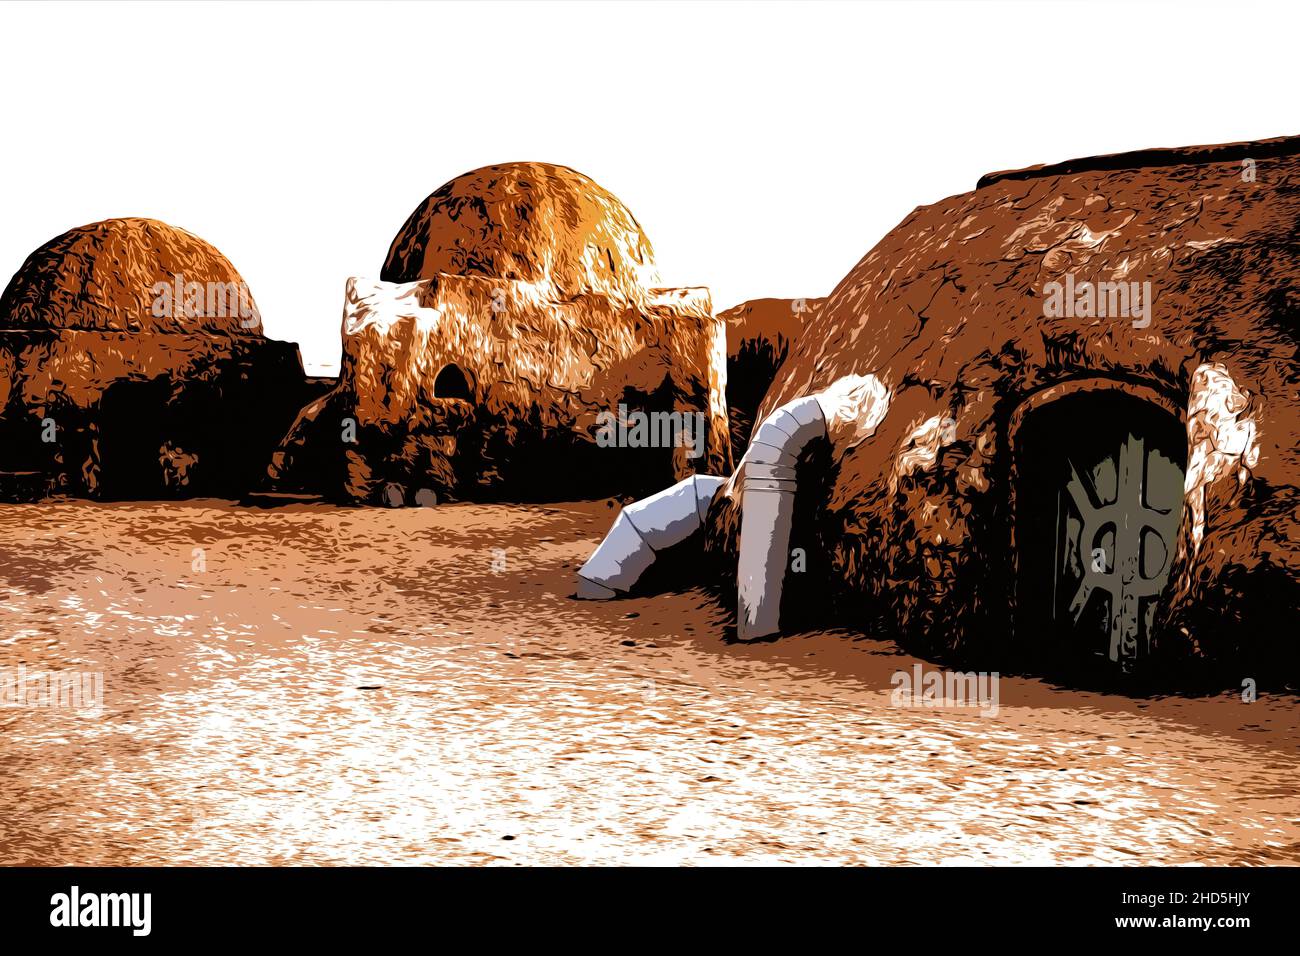 Illustration. Tunisia. Abandoned scenery of the planet Tatooine for the filming of Star Wars in the Sahara Desert Stock Photo